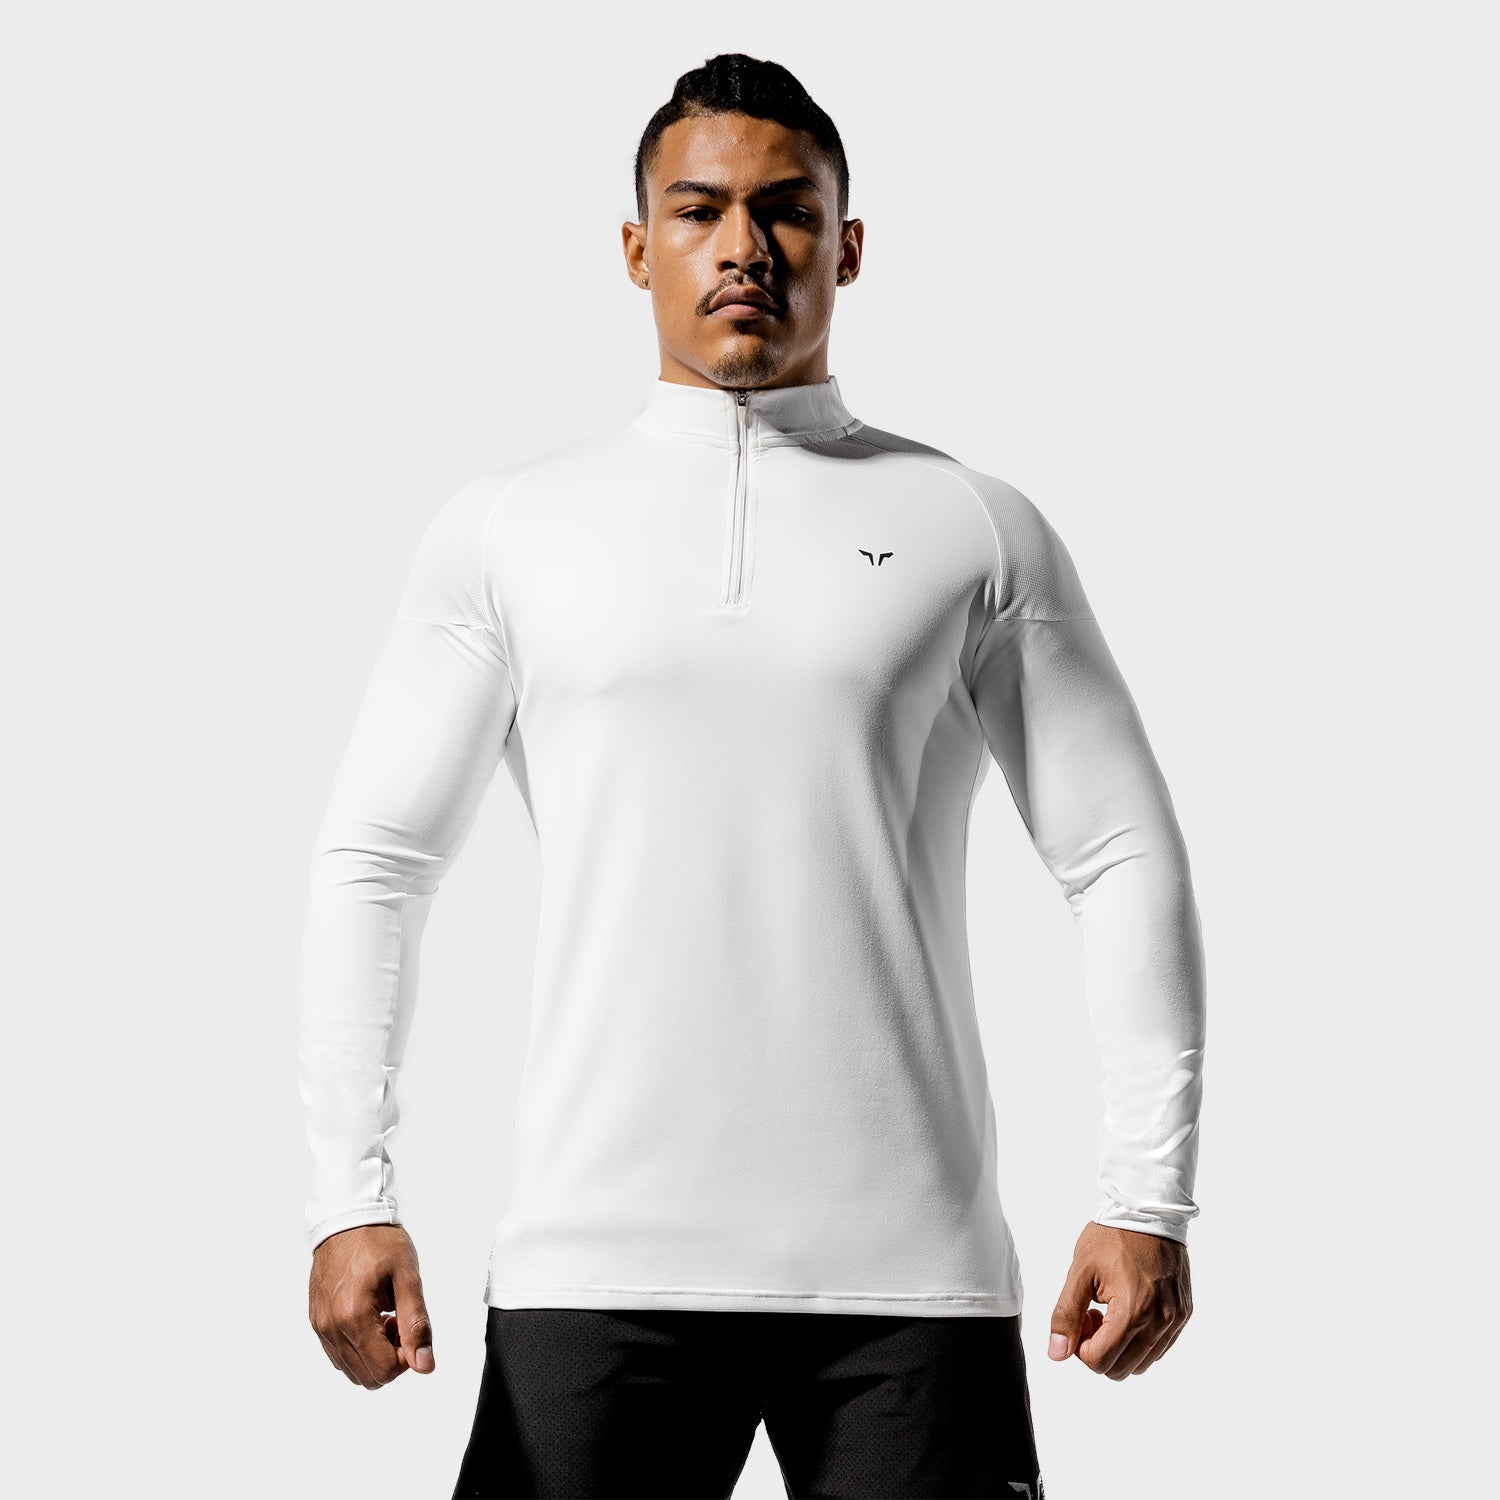 squatwolf-running-tops-for-men-core-running-top-white-long-sleeves-gym-wear